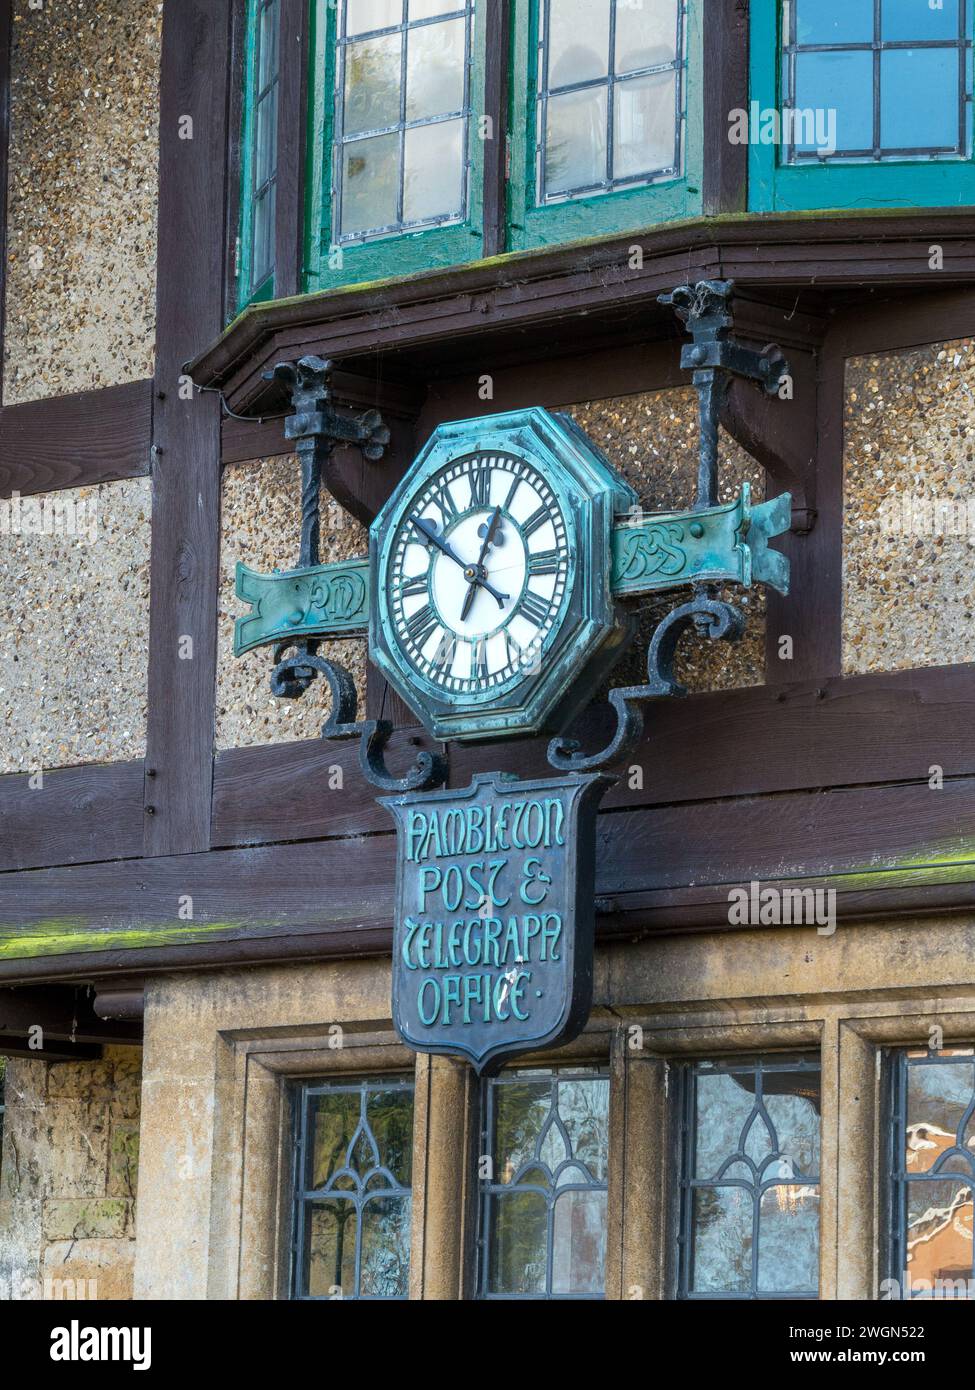 Old village clock with Roman numerals set in wrought iron Post and Telegraph office sign, Hambleton, Rutland, England, UK. Stock Photo